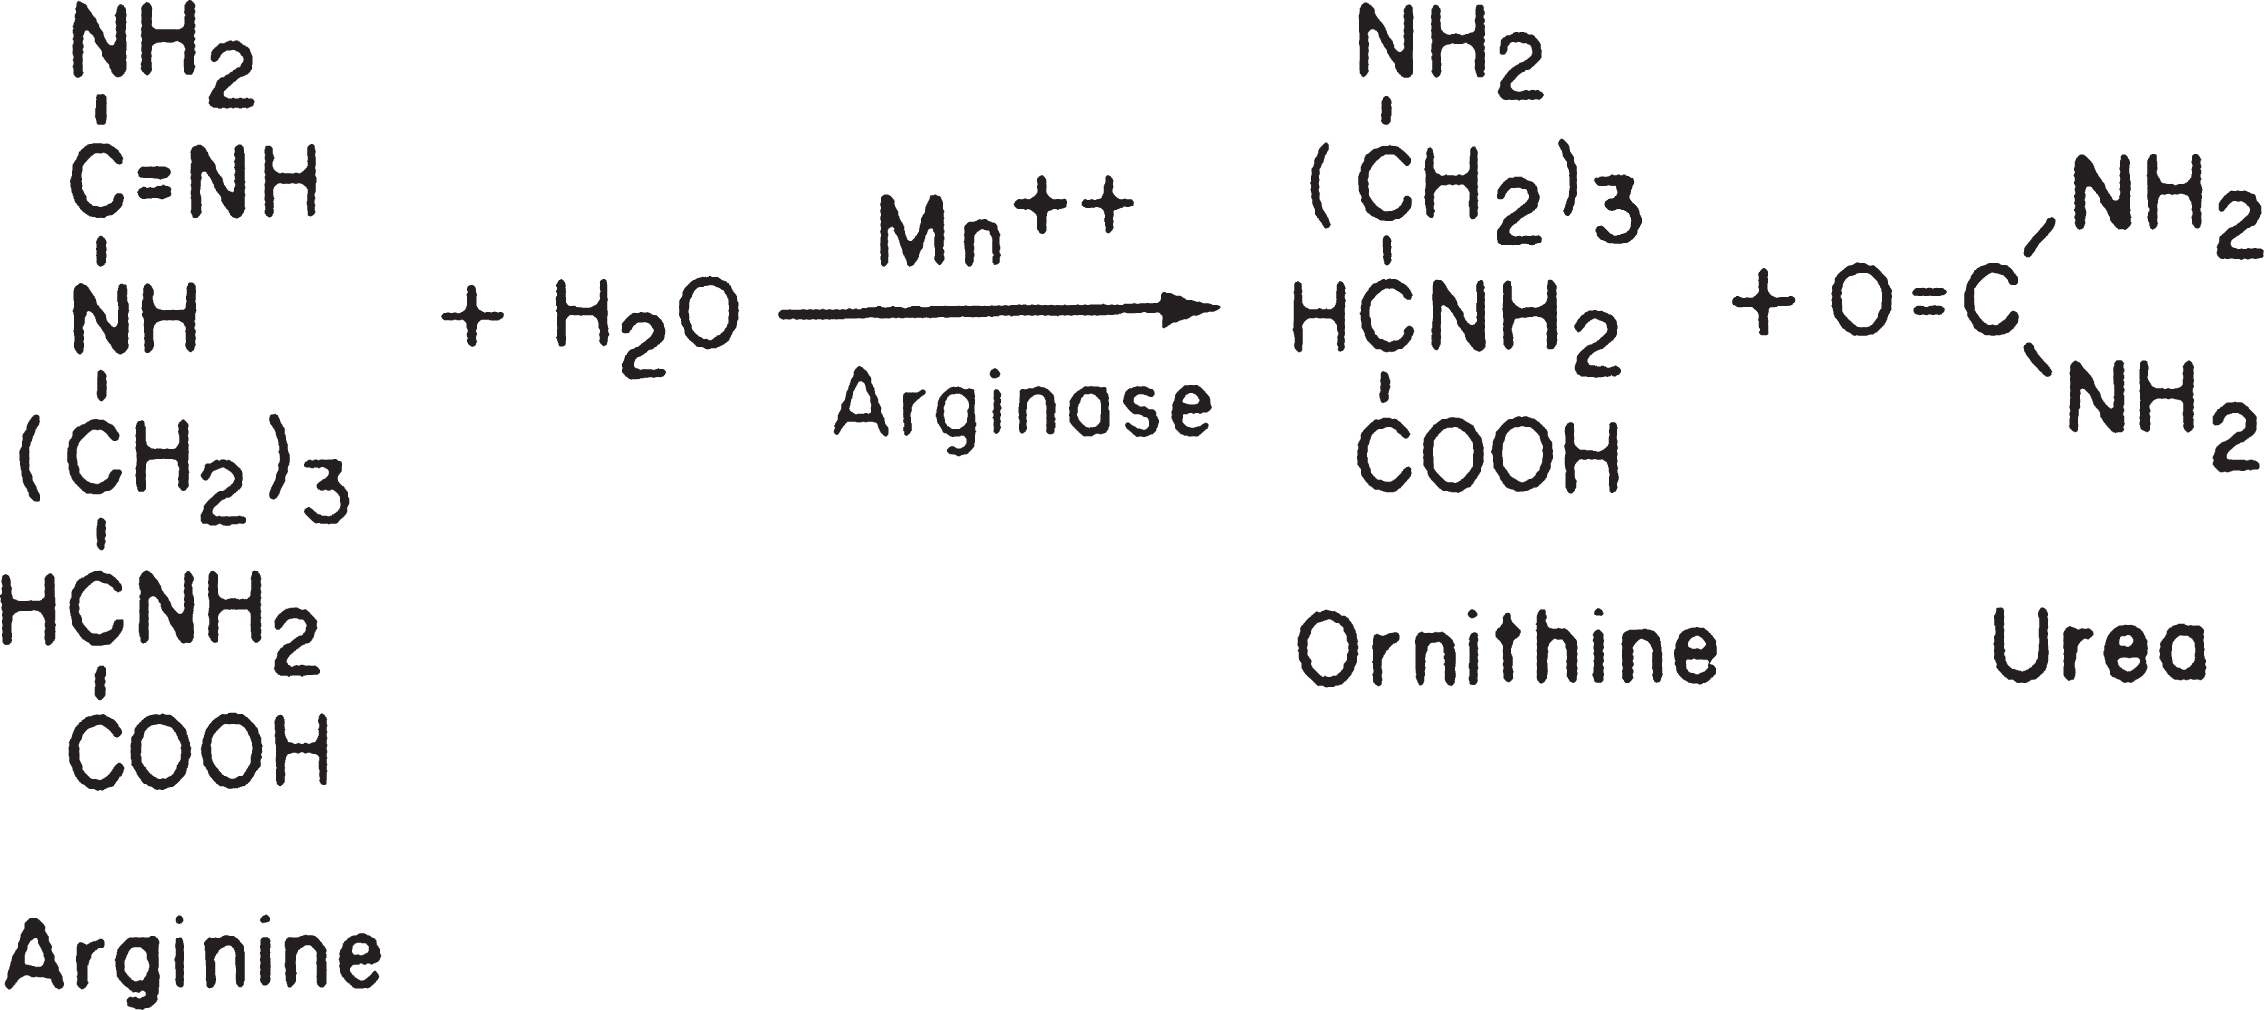 Conversion of arginine to ornithine and urea by the enzymatic activity of arginase.